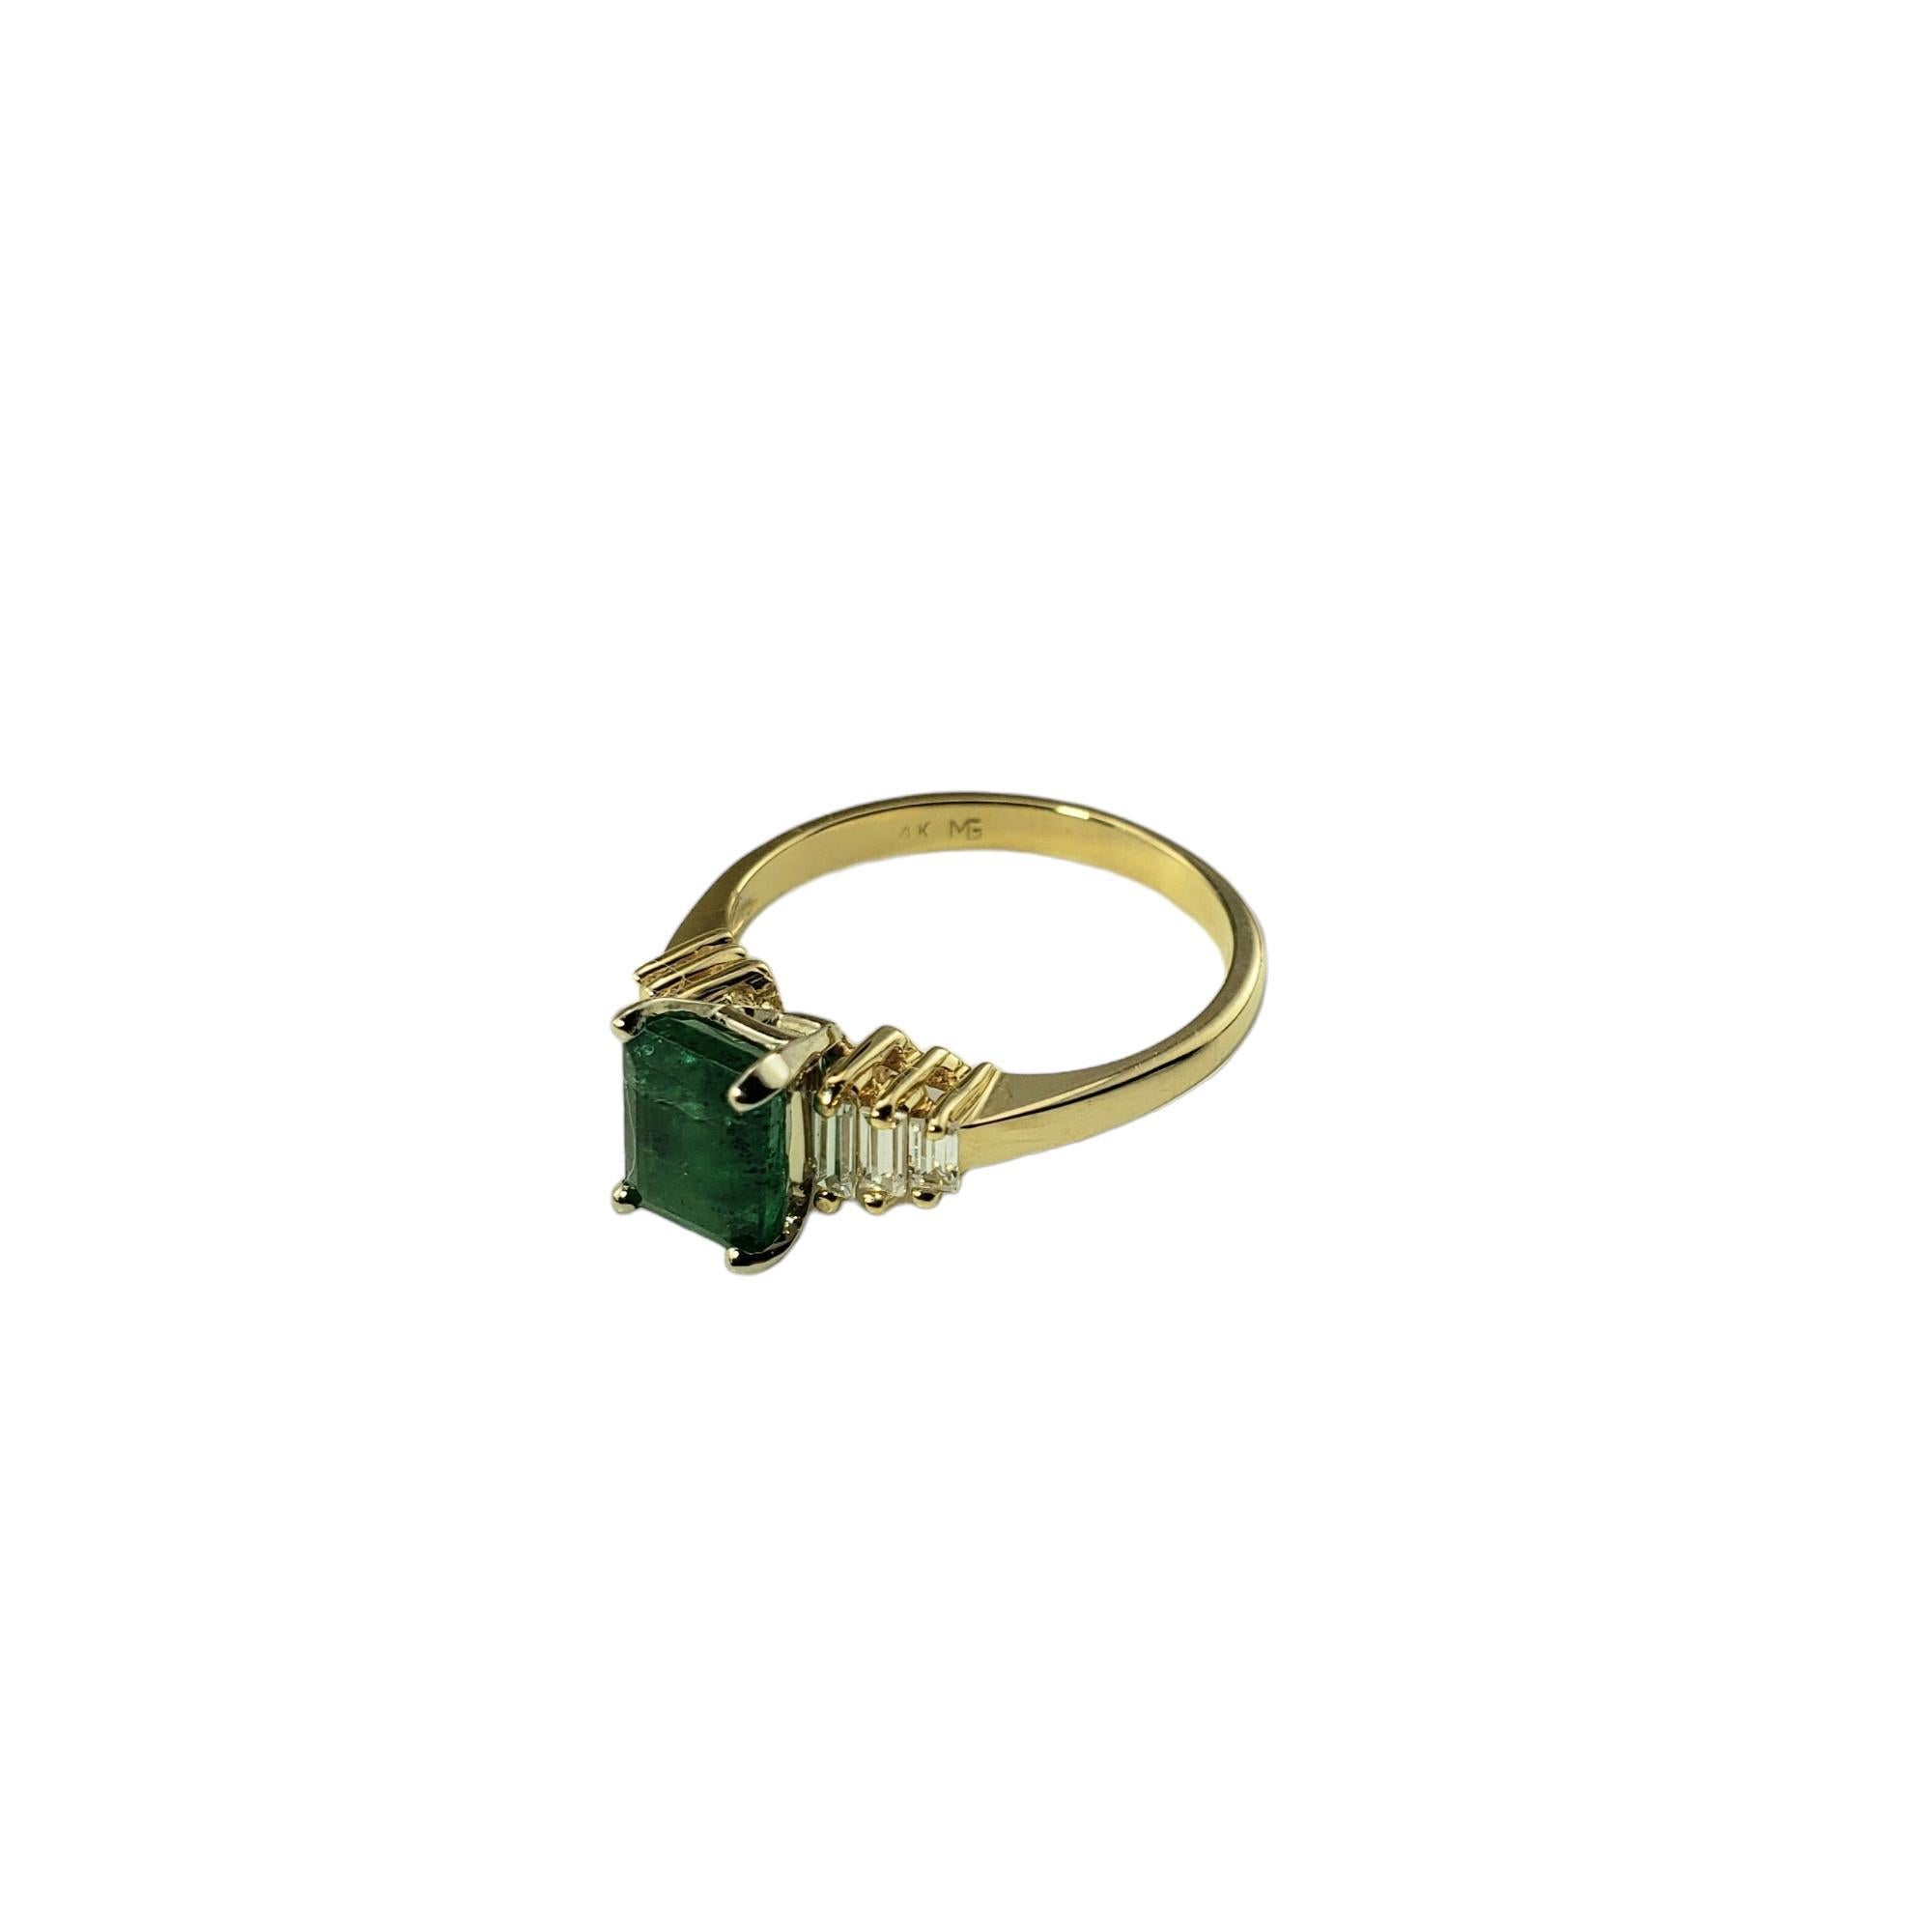 14 Karat Yellow Gold Lab Created Emerald and Cubic Zirconia Ring Size 5.75 JAGi Certified-

This elegant ring features one lab created emerald (6.8 mm x 5.2 mm) and six emerald cut cubic zirconias set in 14K yellow gold.

Emerald weight:  .89